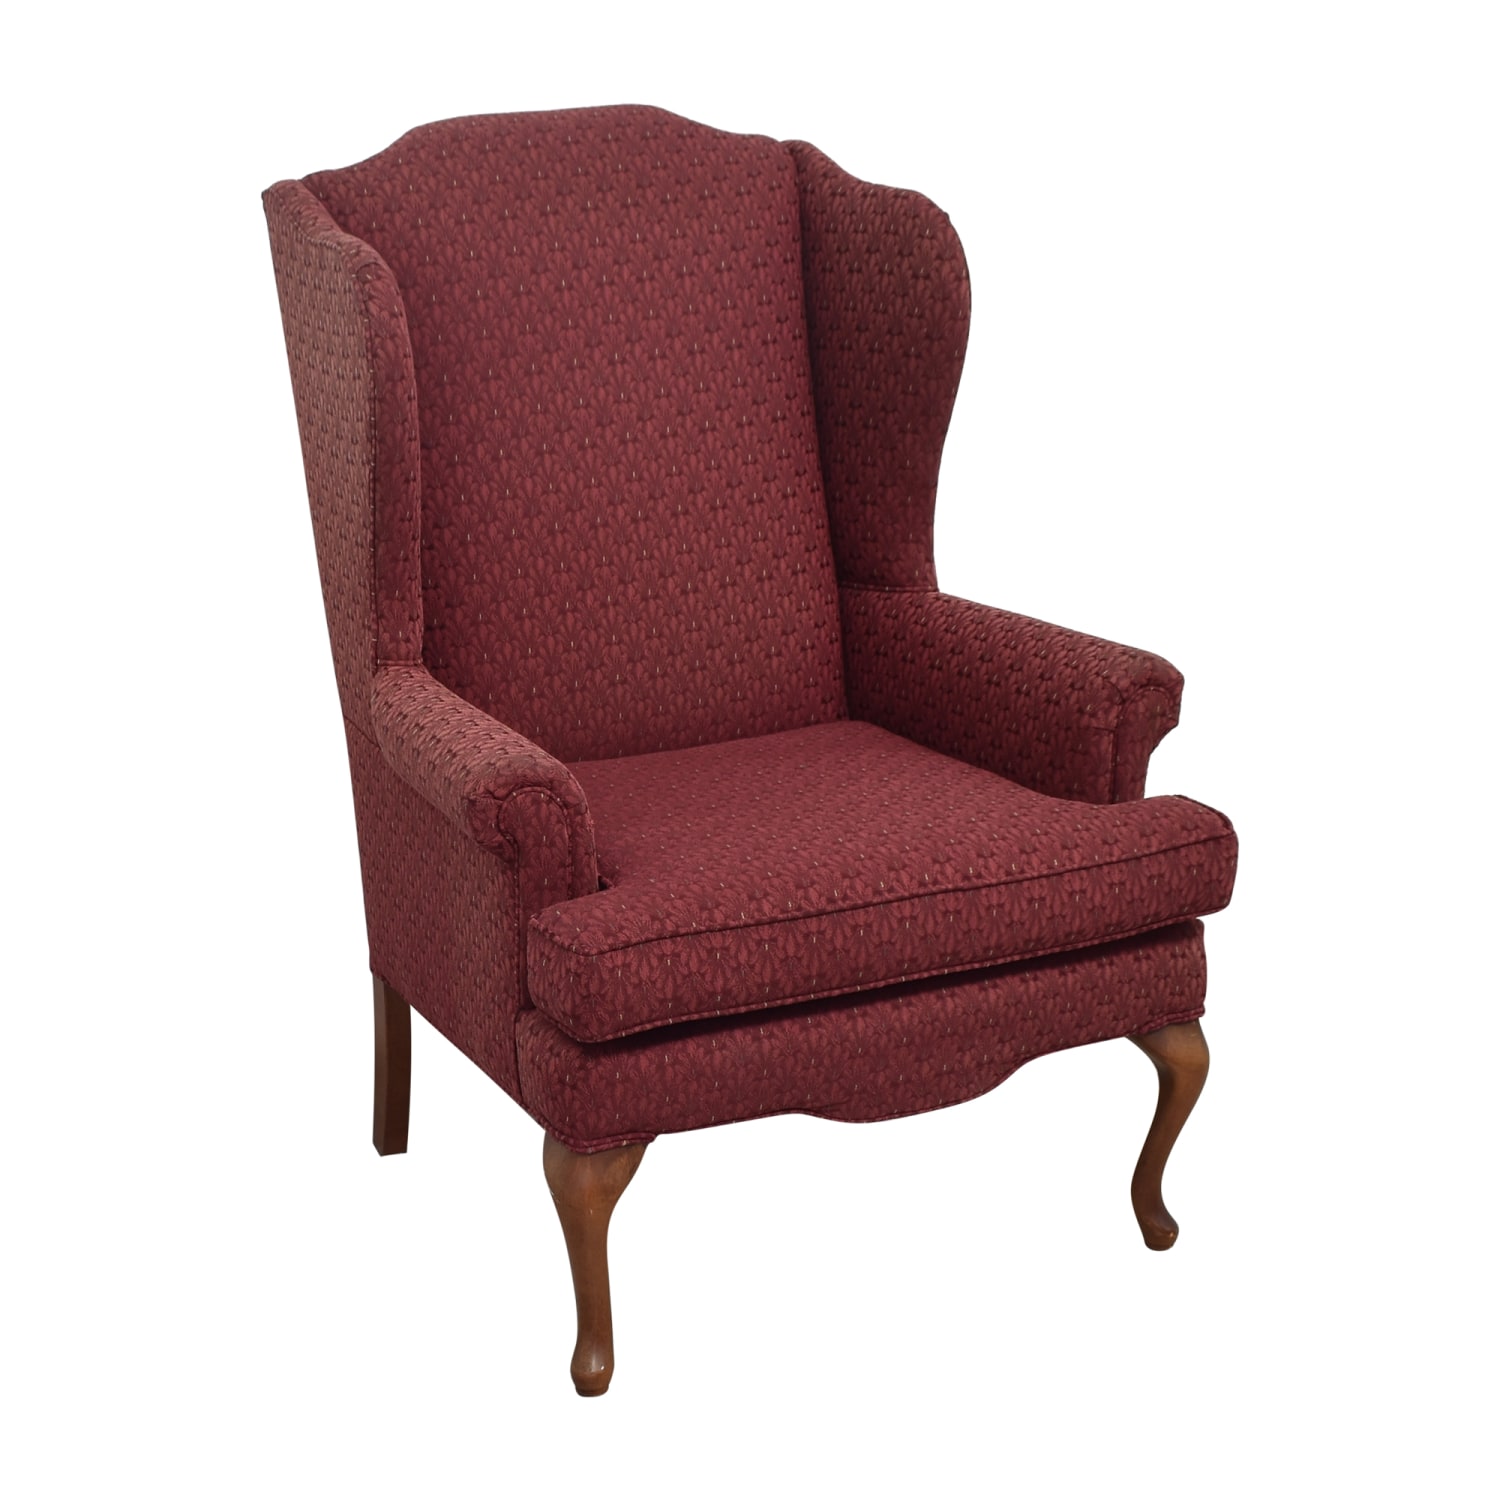 https://res.cloudinary.com/dkqtxtobb/image/upload/f_auto,q_auto:best,w_1500/product-assets/295418/la-z-boy/chairs/accent-chairs/used-la-z-boy-queen-anne-wing-chair.jpeg